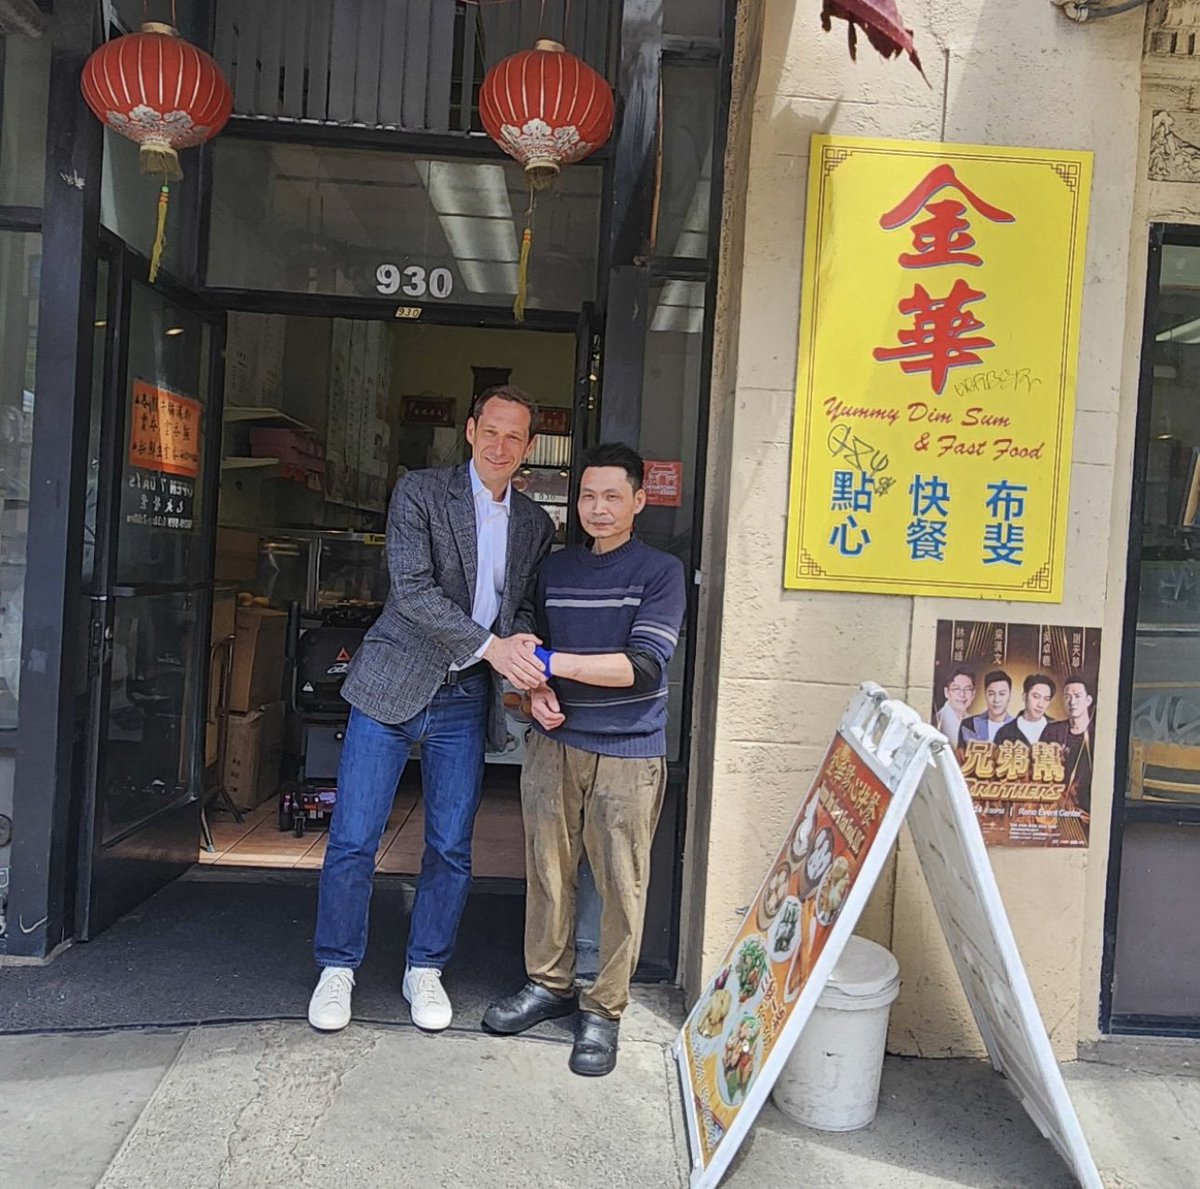 Had a blast in Chinatown Saturday, meeting with our city’s incredible merchants! I love being out in the field, hearing about voters' hopes & challenges. We also attended the Lion Dance ME Competition Award Ceremony with our youth dancers. I had to grab some boba along the way!